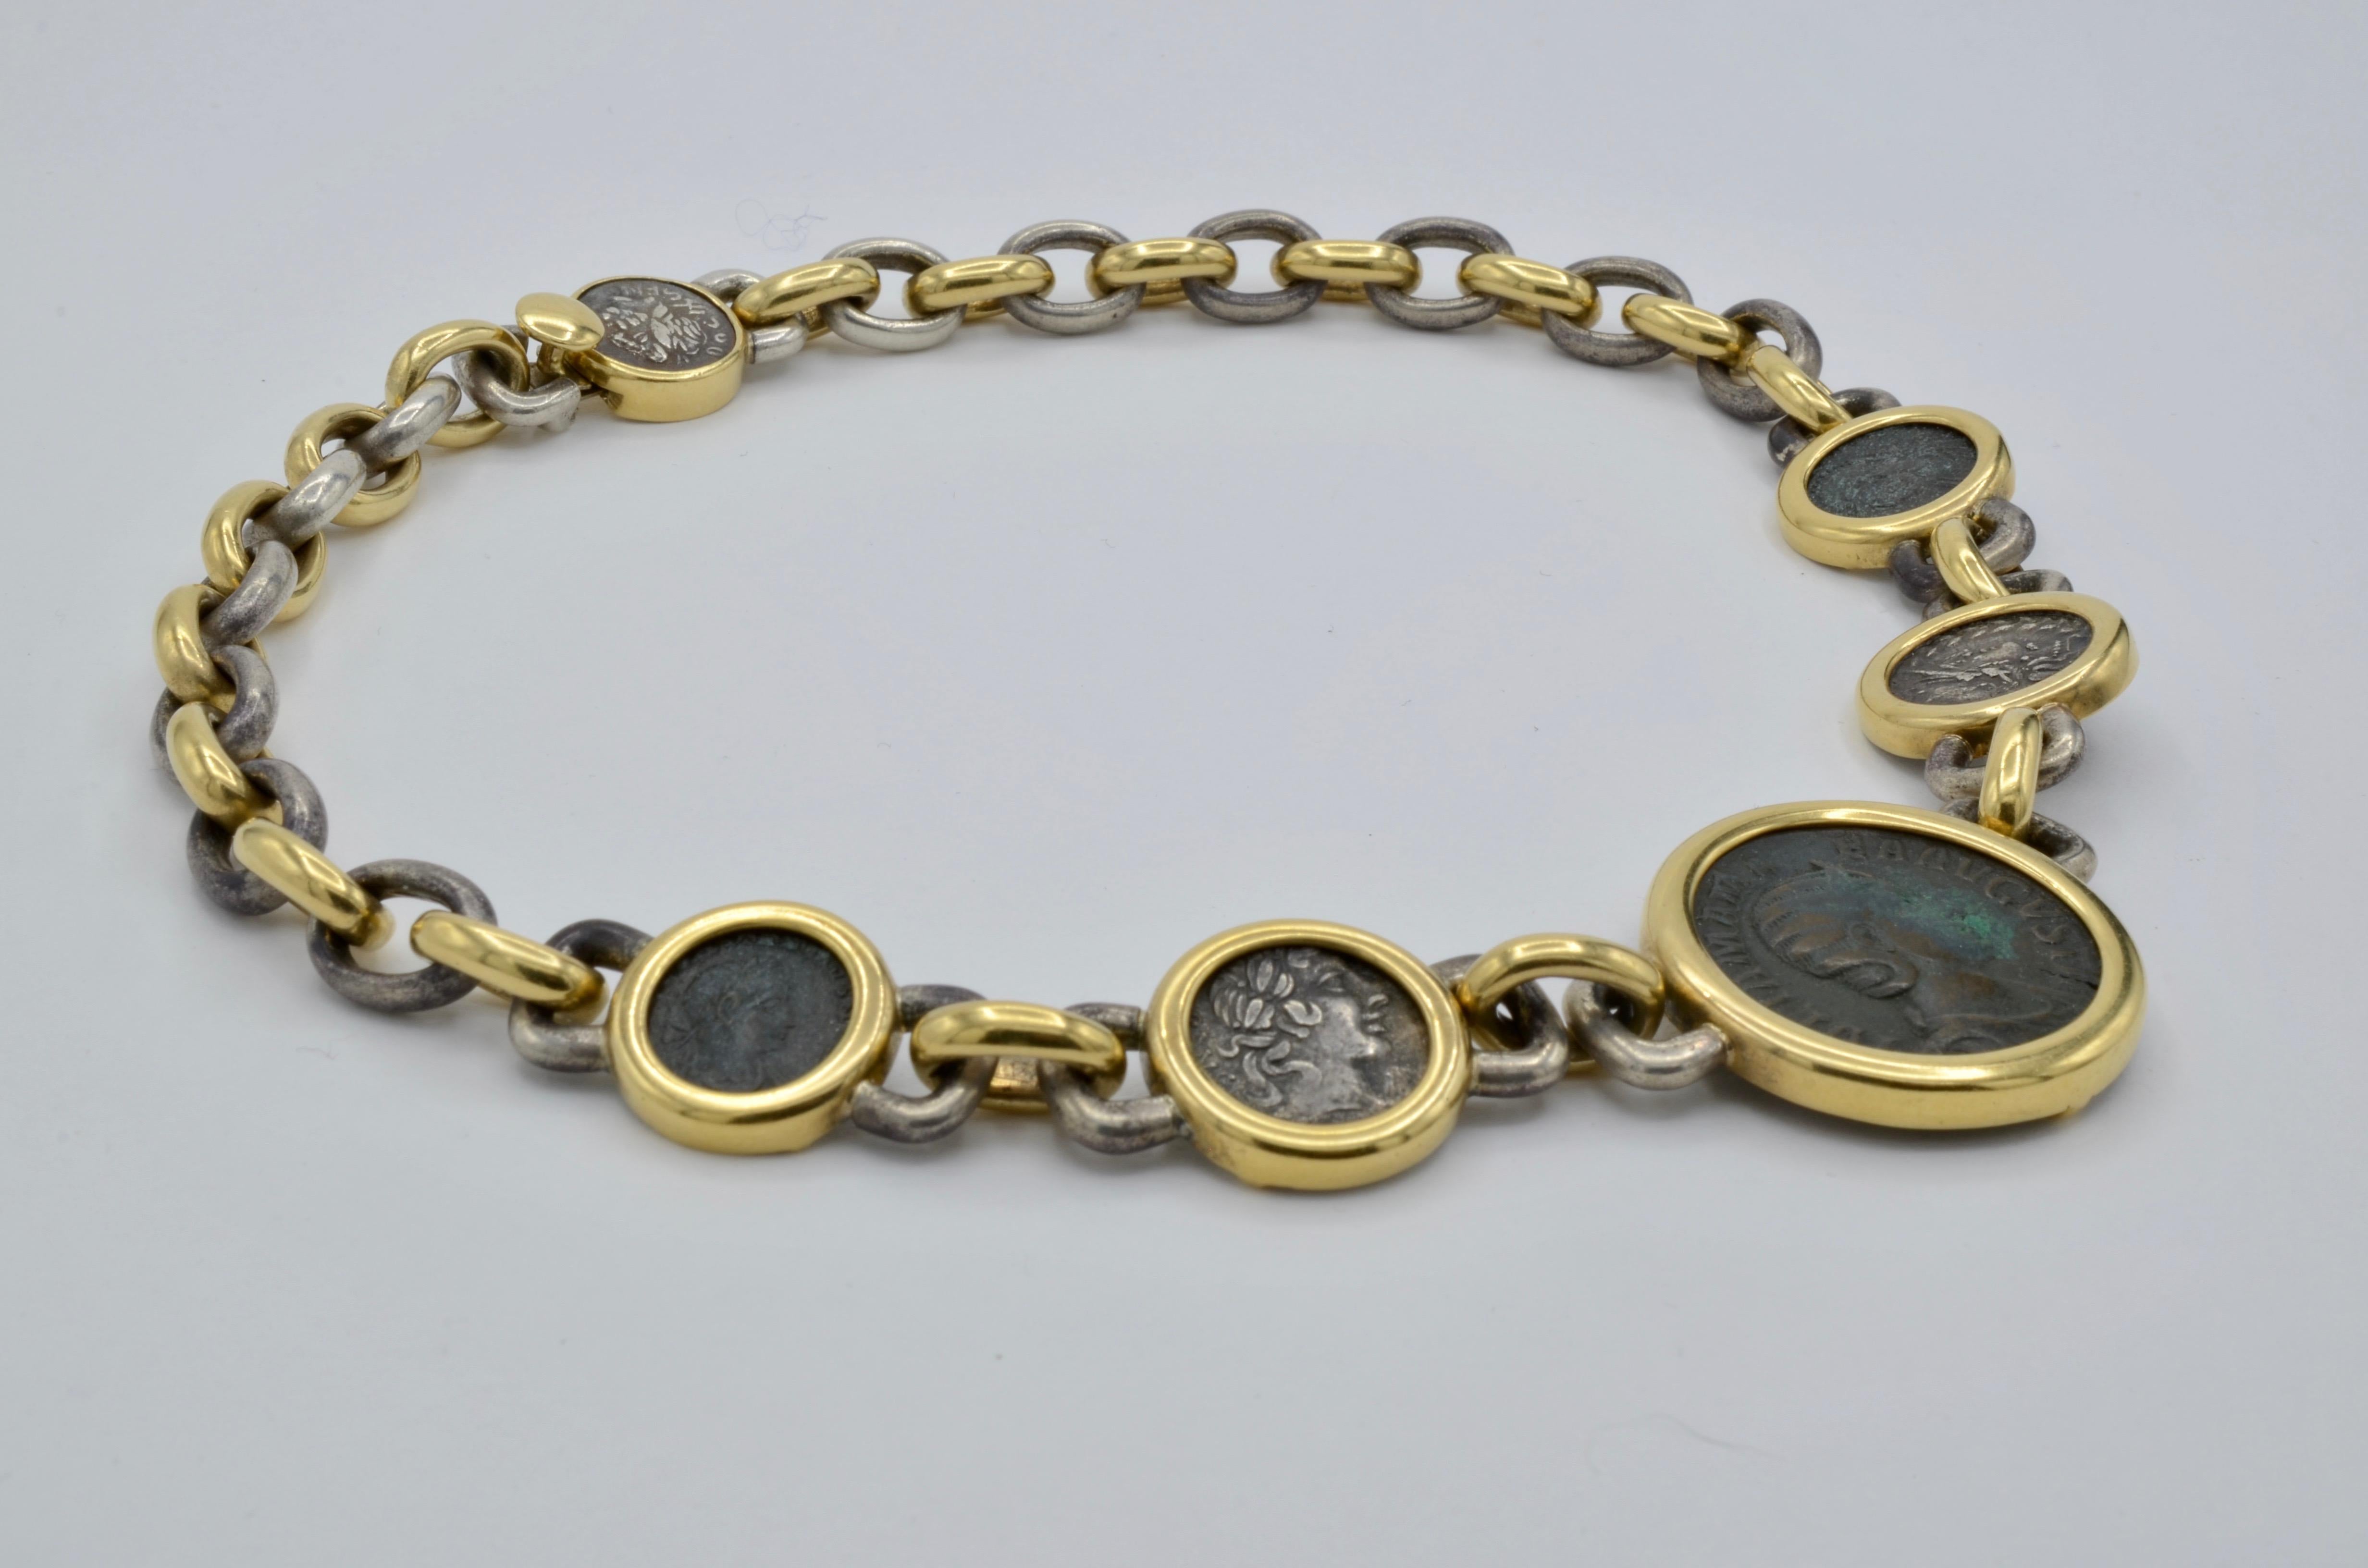 This old Roman coin necklace is beautifully thought out as all of the coins are well matched and set in heavy 18k yellow gold bezels. The interlocking links alternate between 18k yellow gold and sterling silver with a Roman coin in the back clasp.